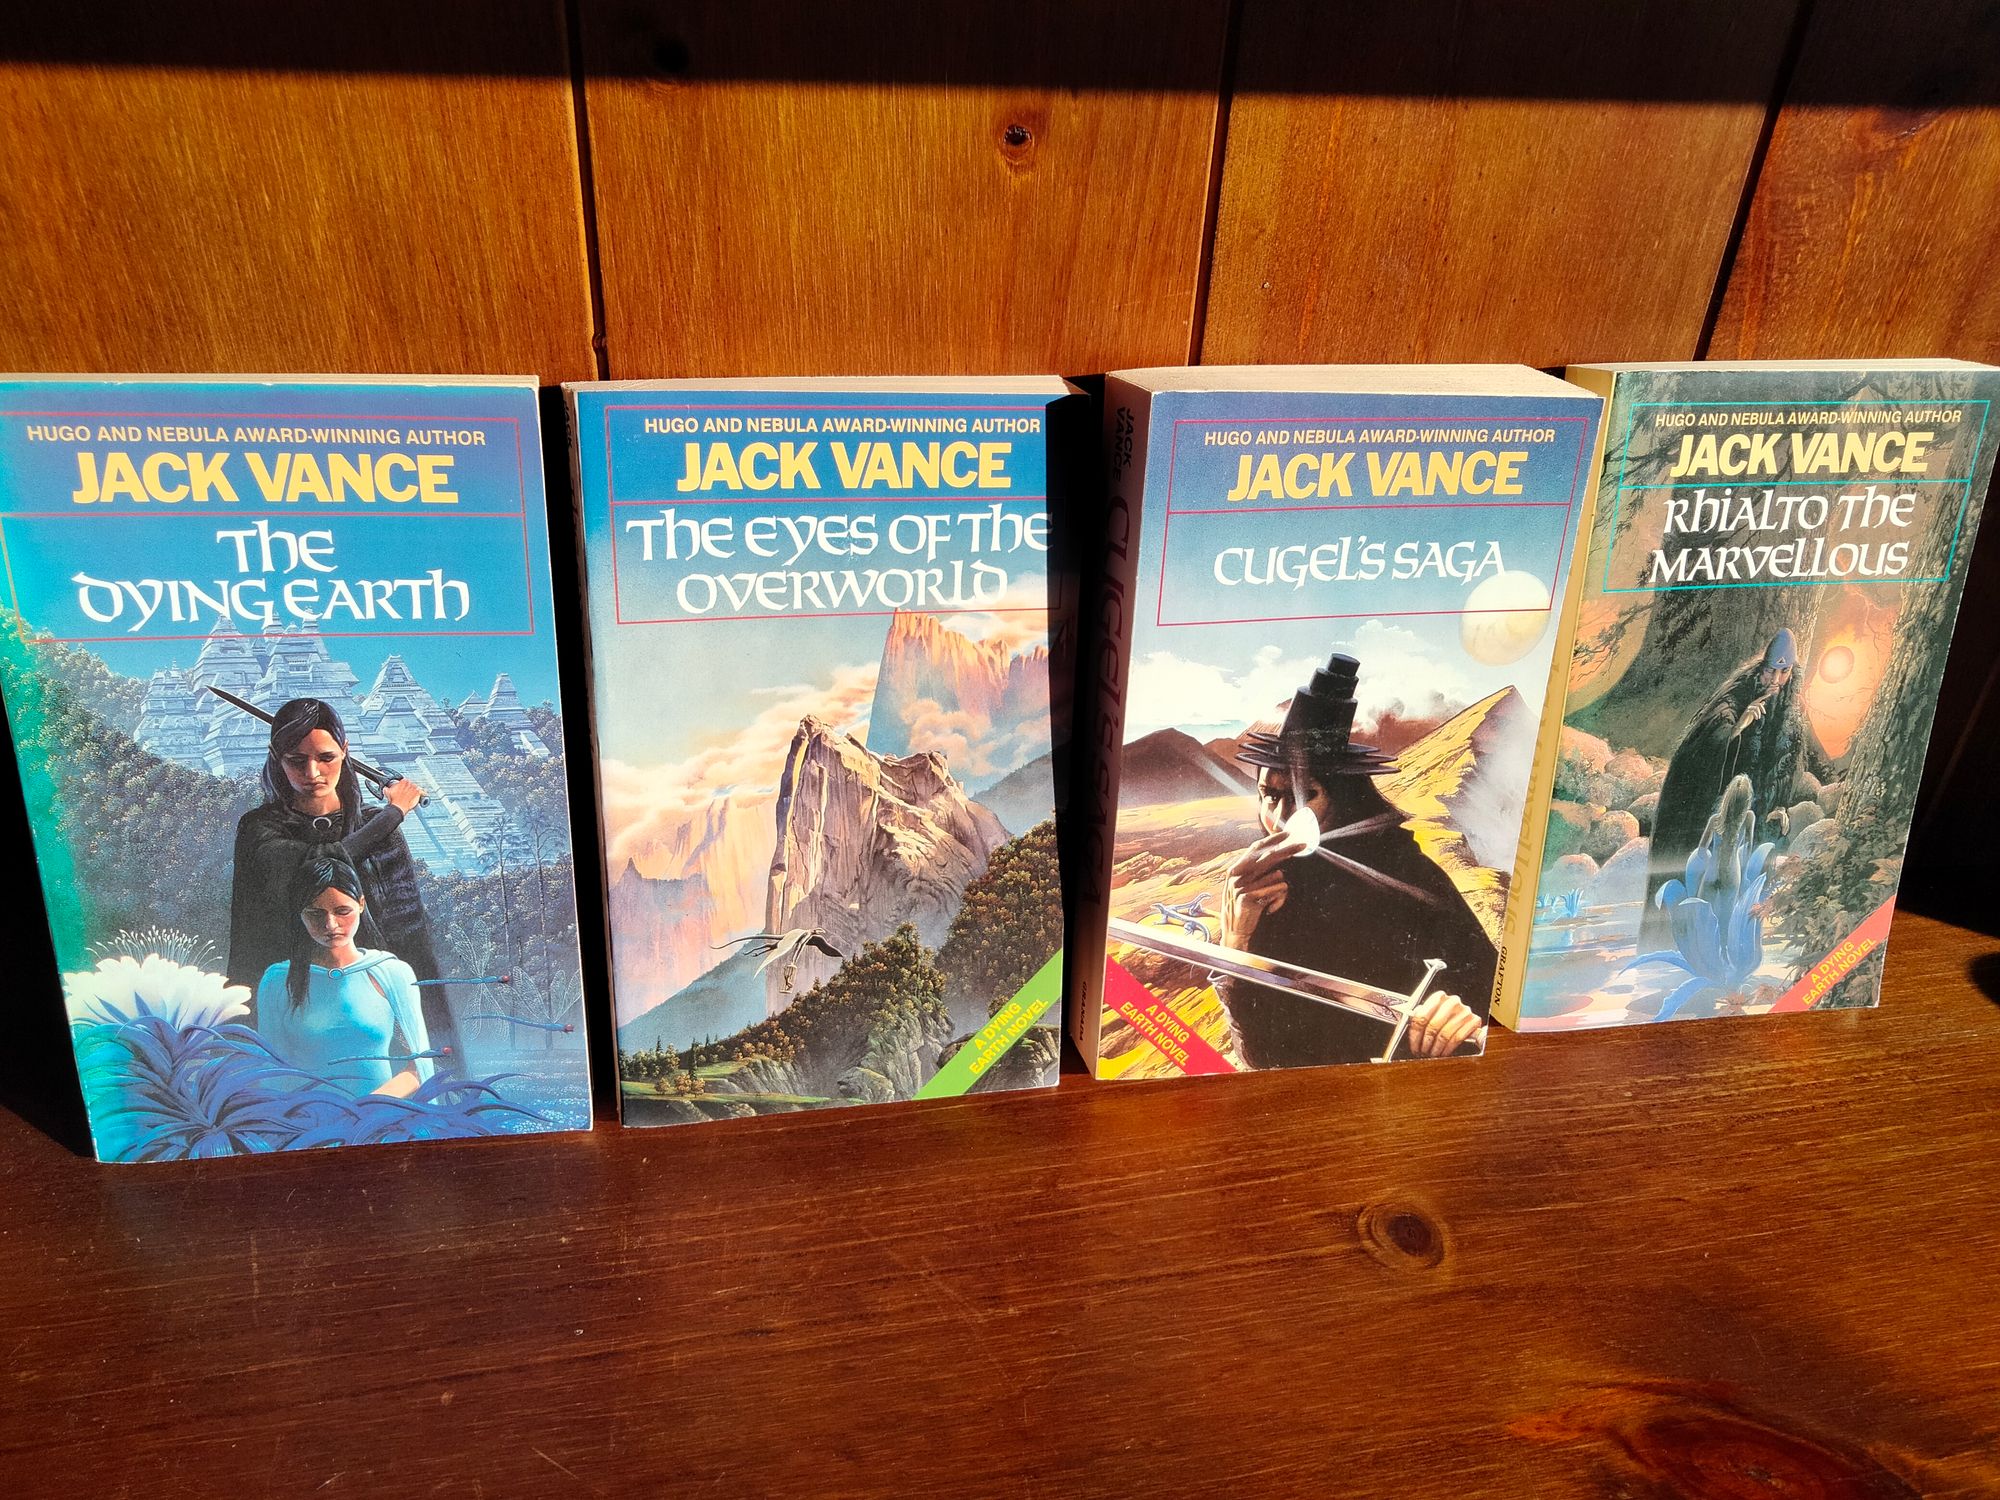 Covers of The Dying Earth, The Eyes of the Overworld, Cugel's Saga and Rhialto the Marvellous, all by Jack Vance. The covers depict various wizards, heroes and fantasy landscapes. The artwork is a bit bland if I'm being honest.